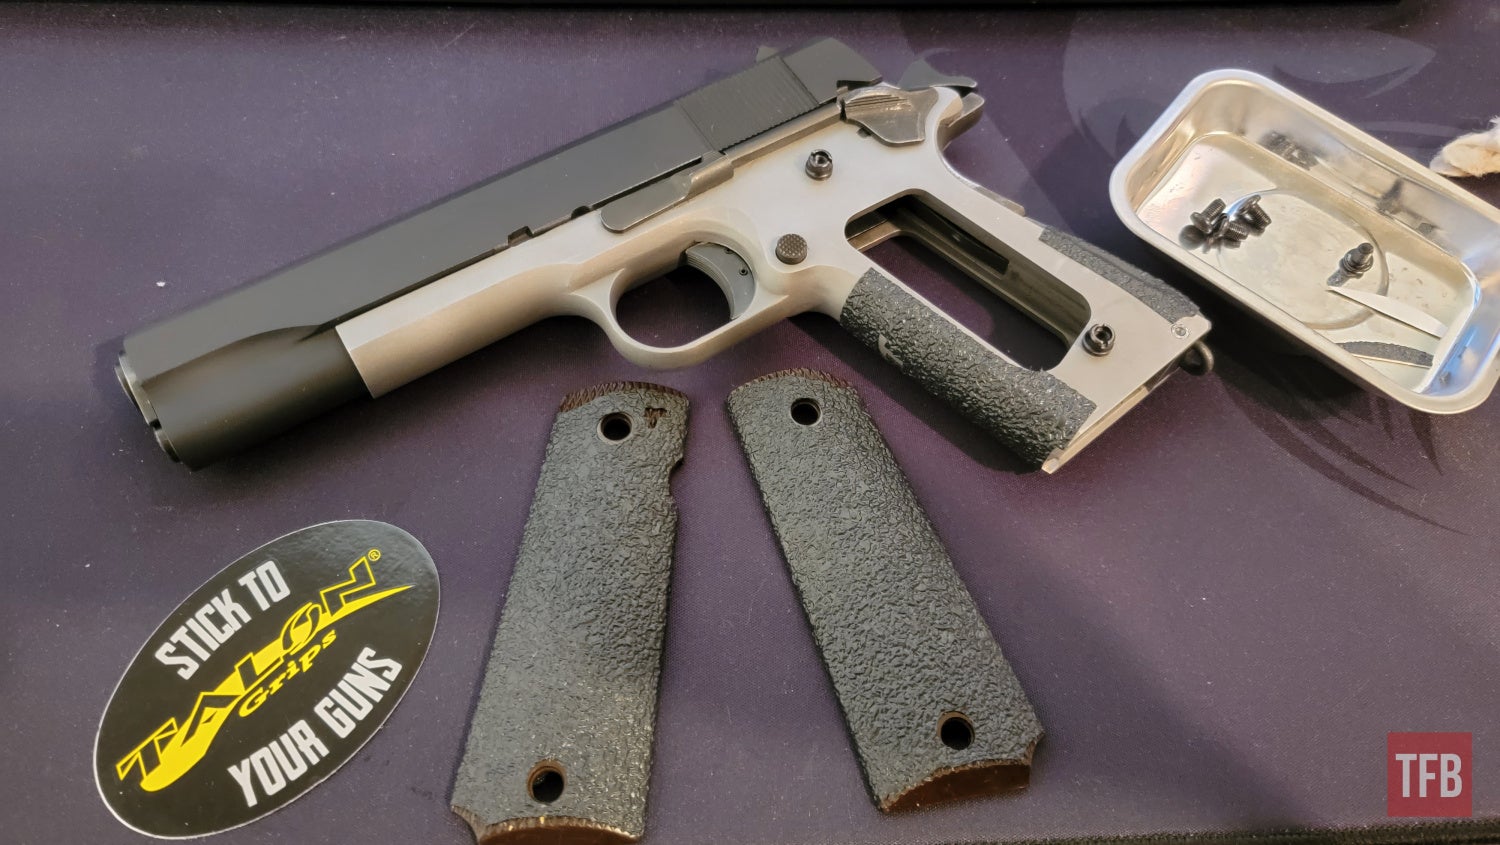 TFB Review: Installing and Shooting the New Talon Modular 1911 Grips